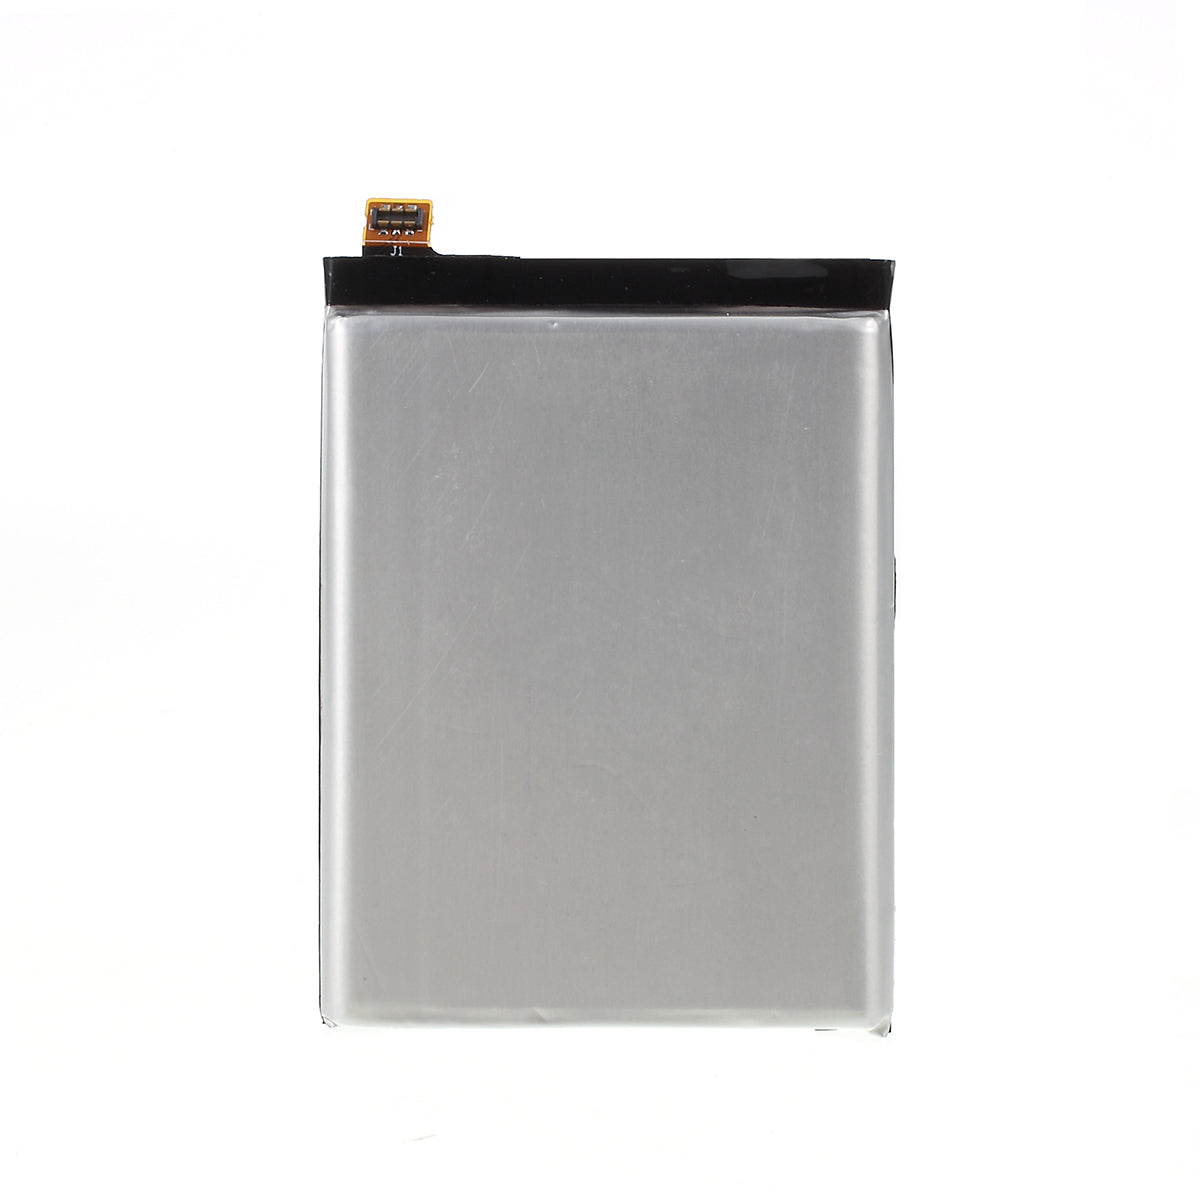 Removable Li-ion Battery for Doogee S60 5580mAh